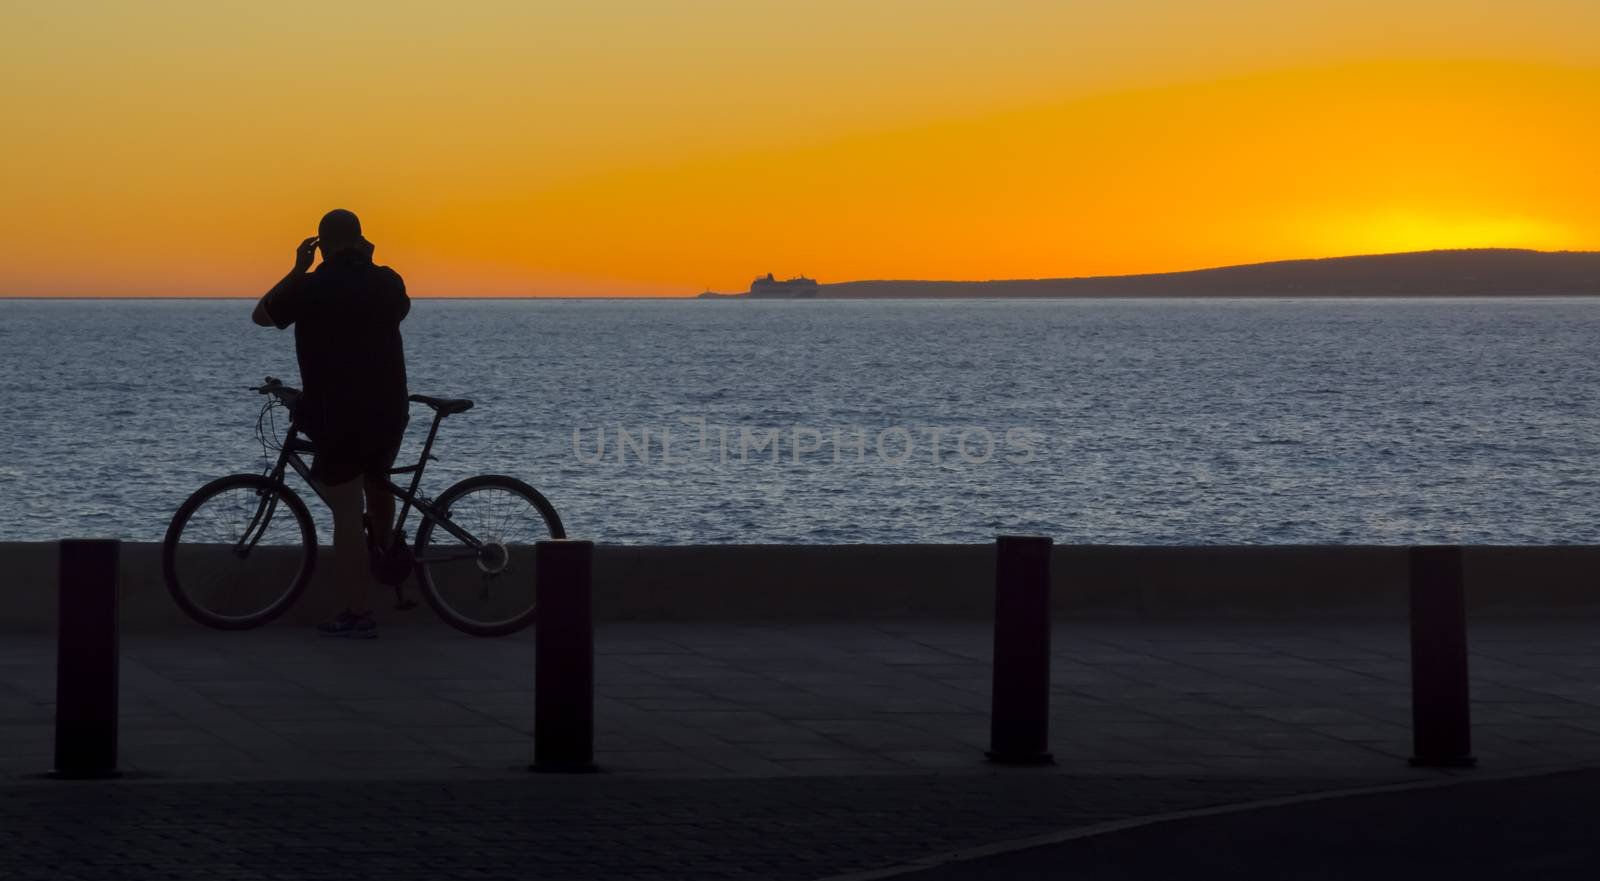 Bicyclist Sunset. Bicyclist watching sunset in Cala Estancia, Mallorca, Balearic islands, Spain in October.